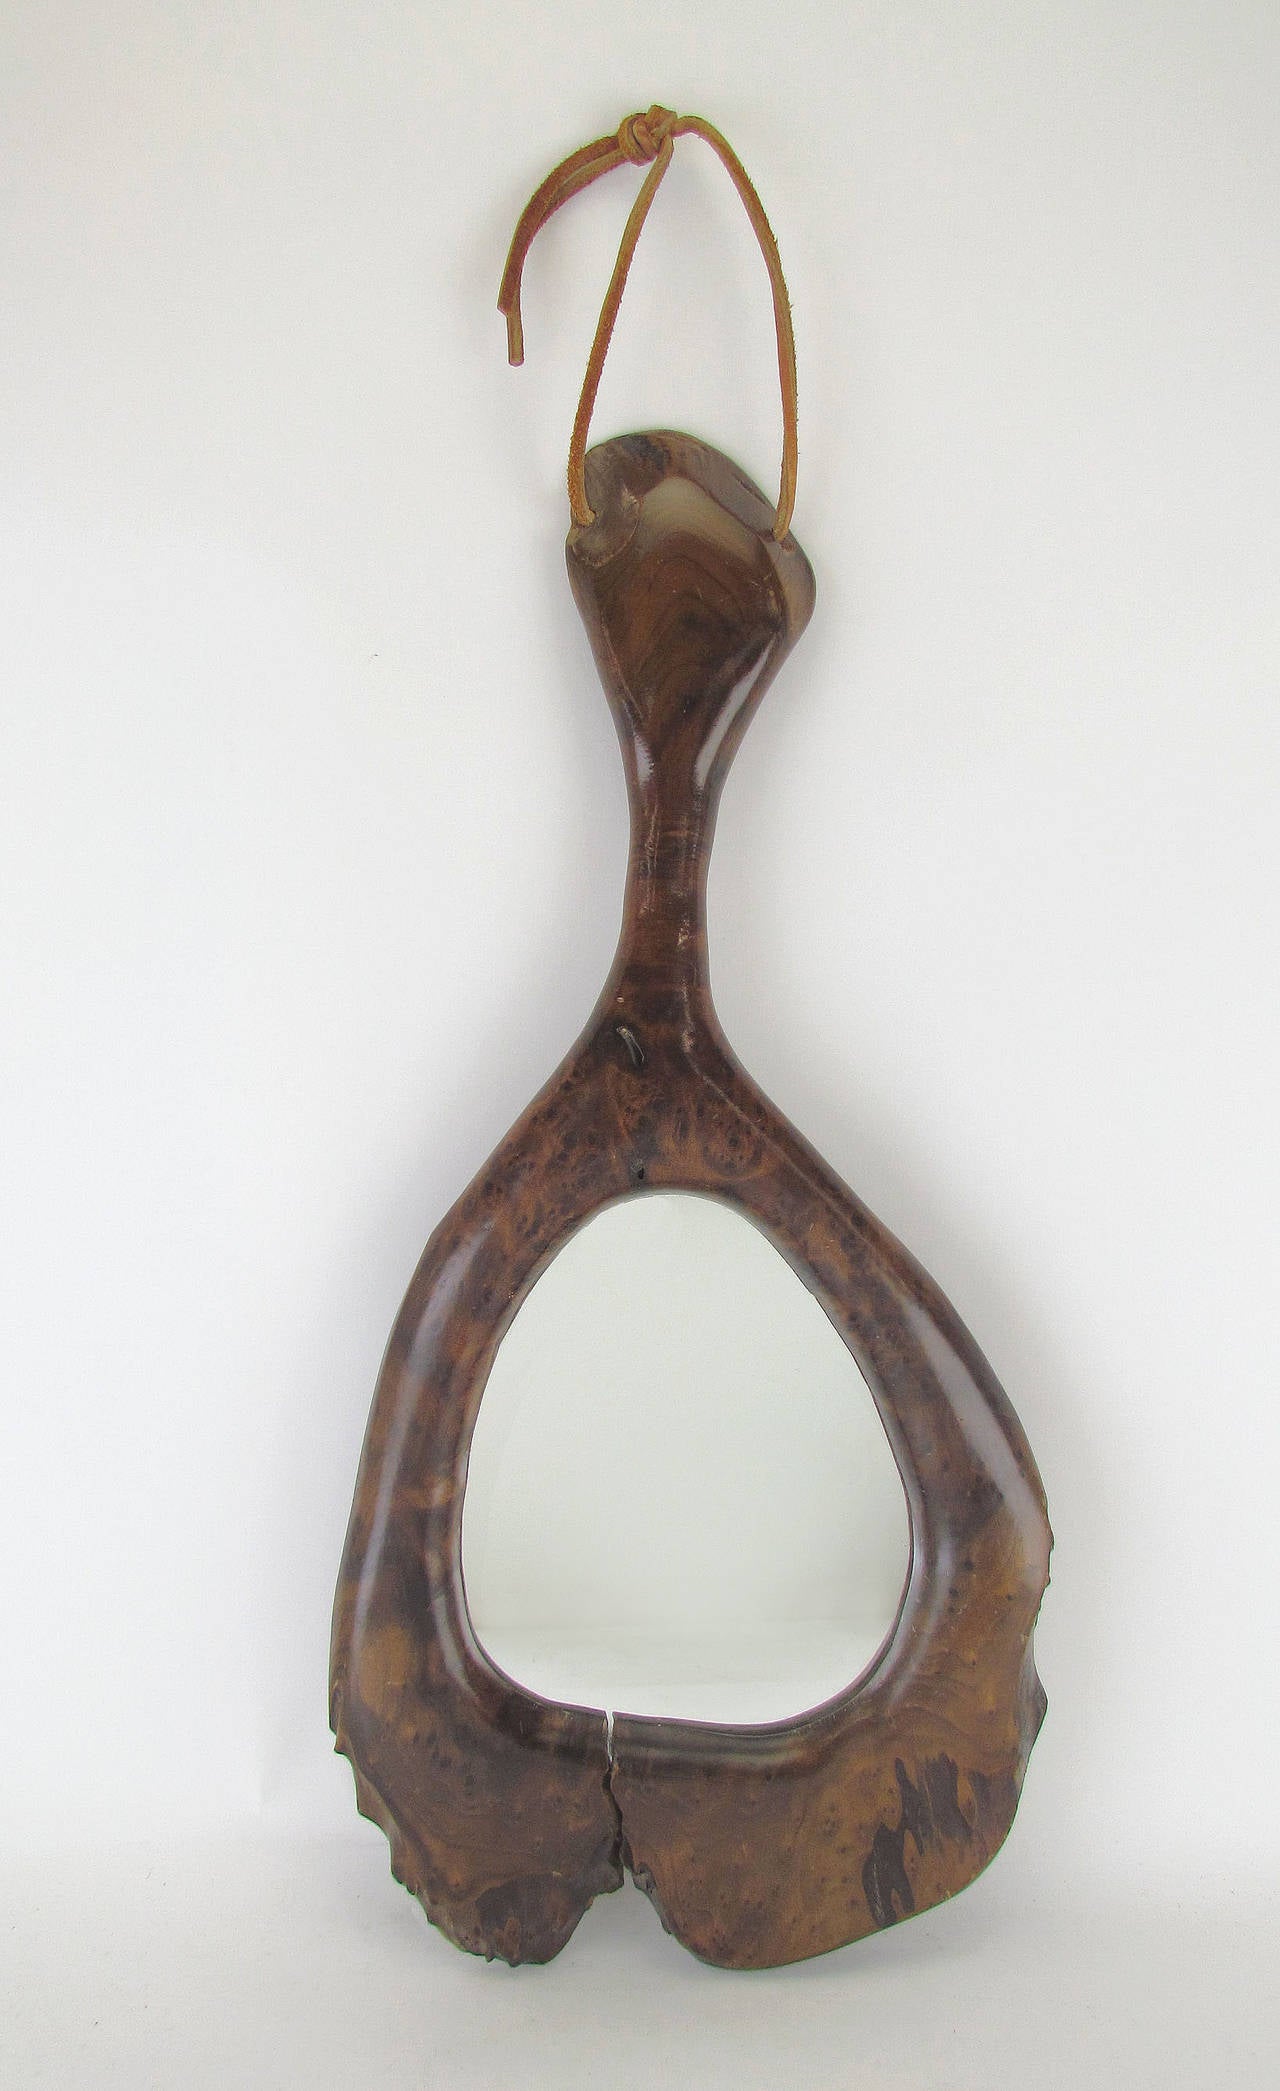 One-of-a-kind organic hand-carved burl wood hand mirror with leather thong for hanging, circa 1970s. A wonderful example of Hippie-era handcraft. Can be used as a hand-held vanity mirror or wall hung for dramatic effect.

24.75